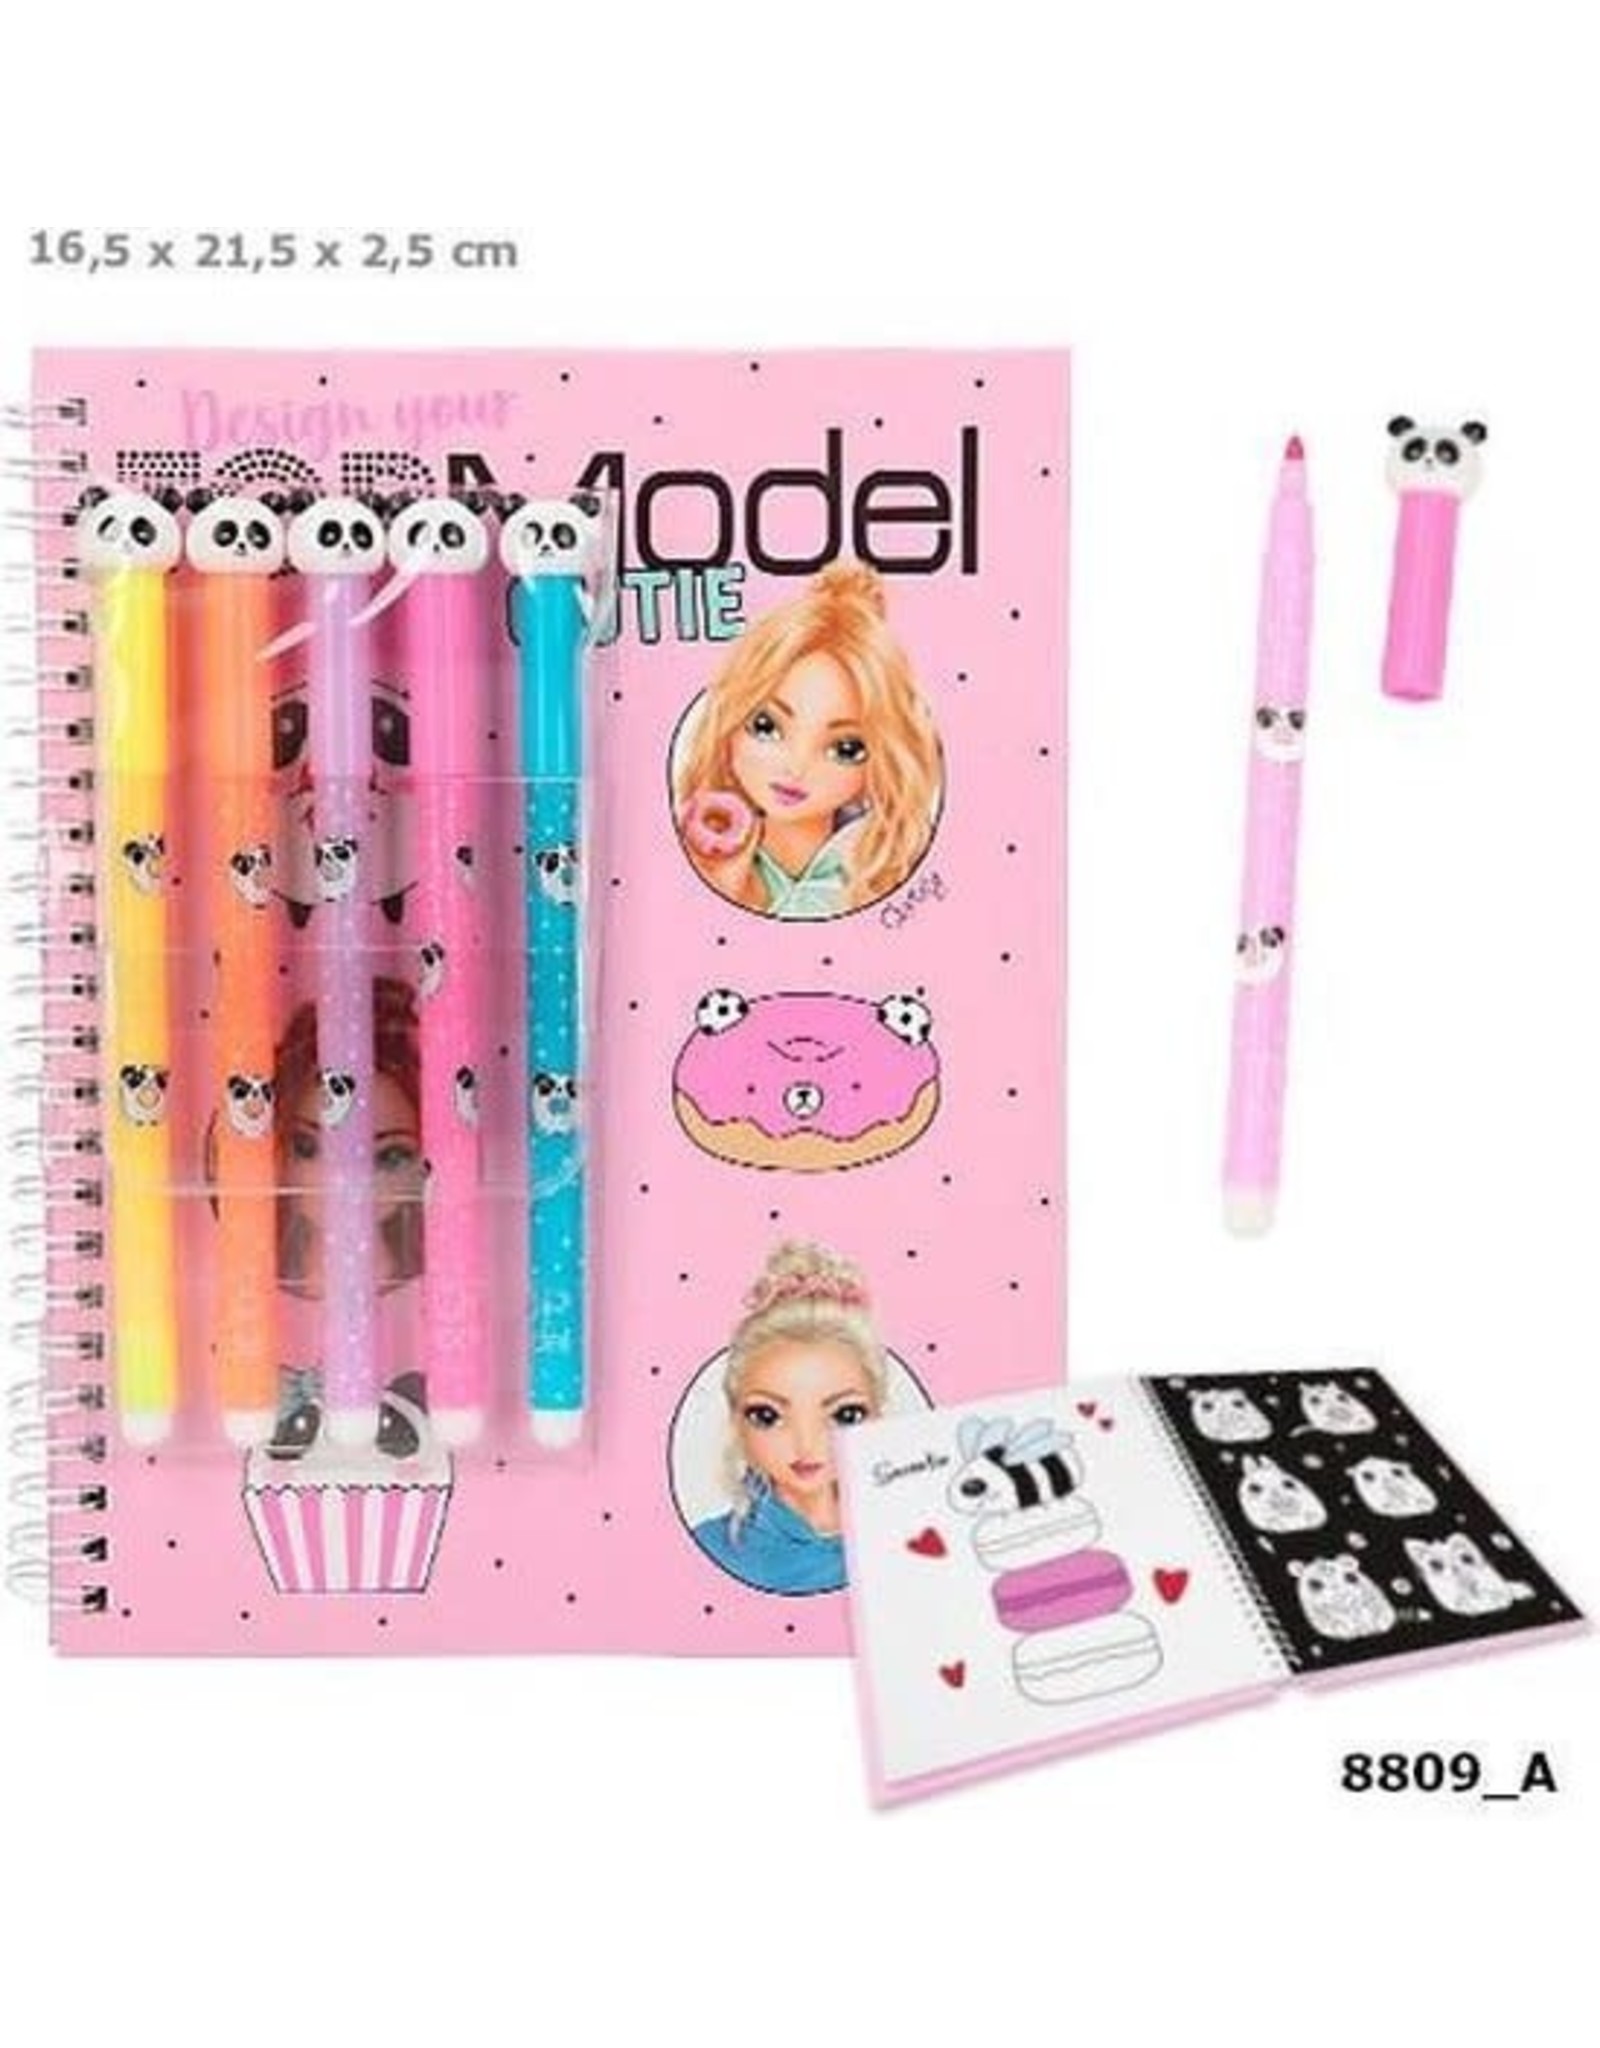 TOPMODEL Top Model - Colouring Book w/Felt Pens - Candy Cake (48809) /Arts and Crafts